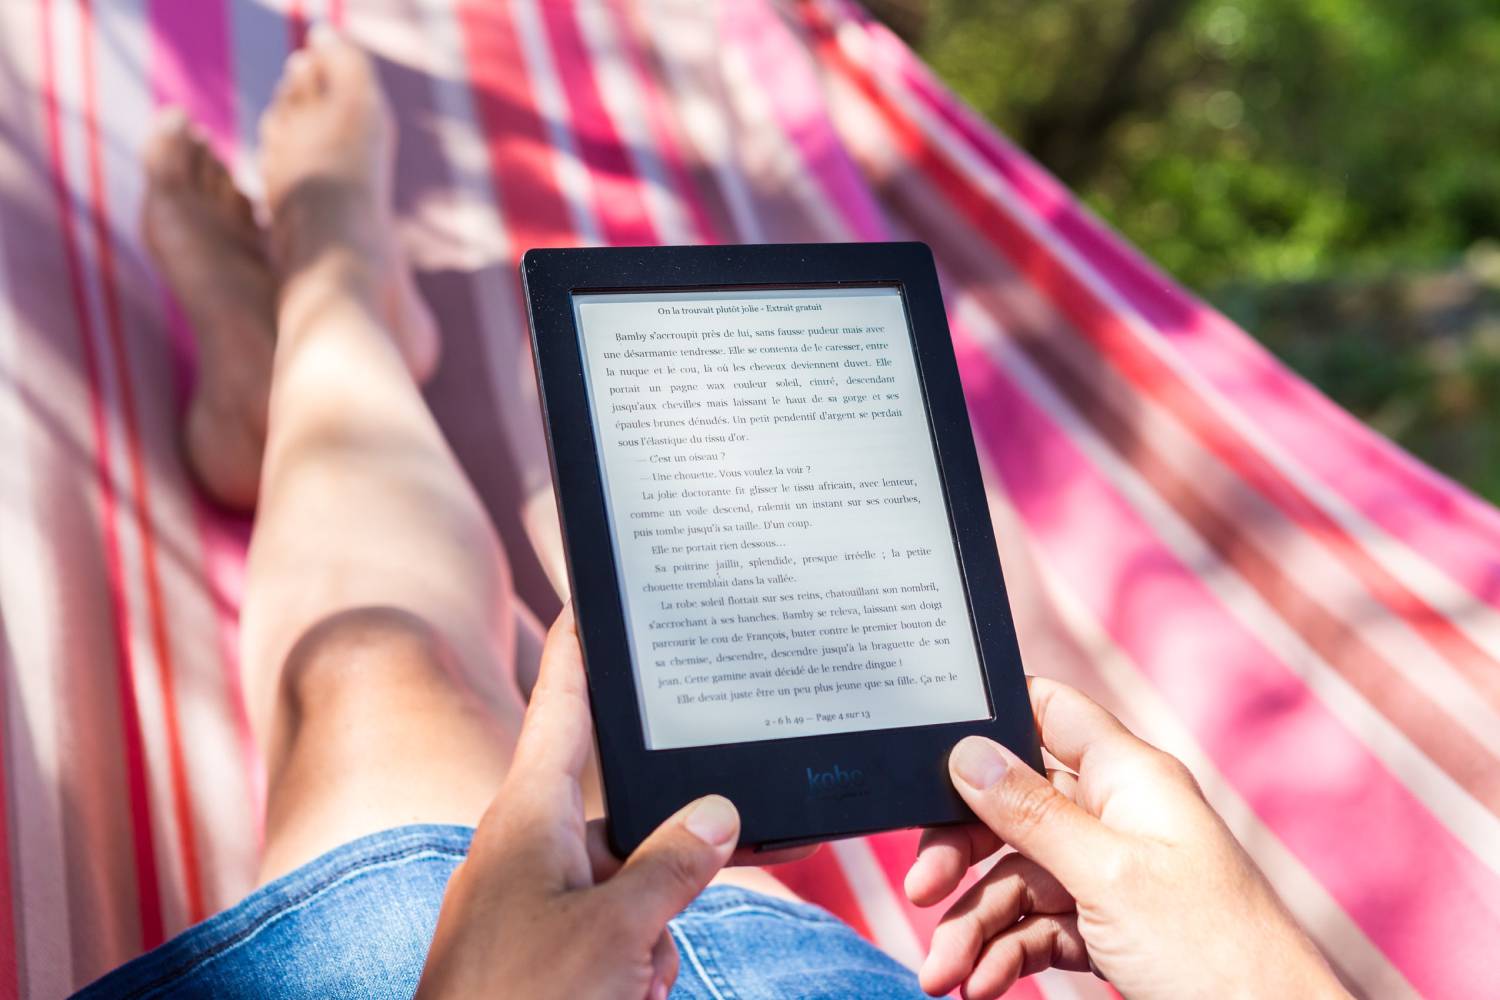 A person reading with an e-reader in a hammock outside.